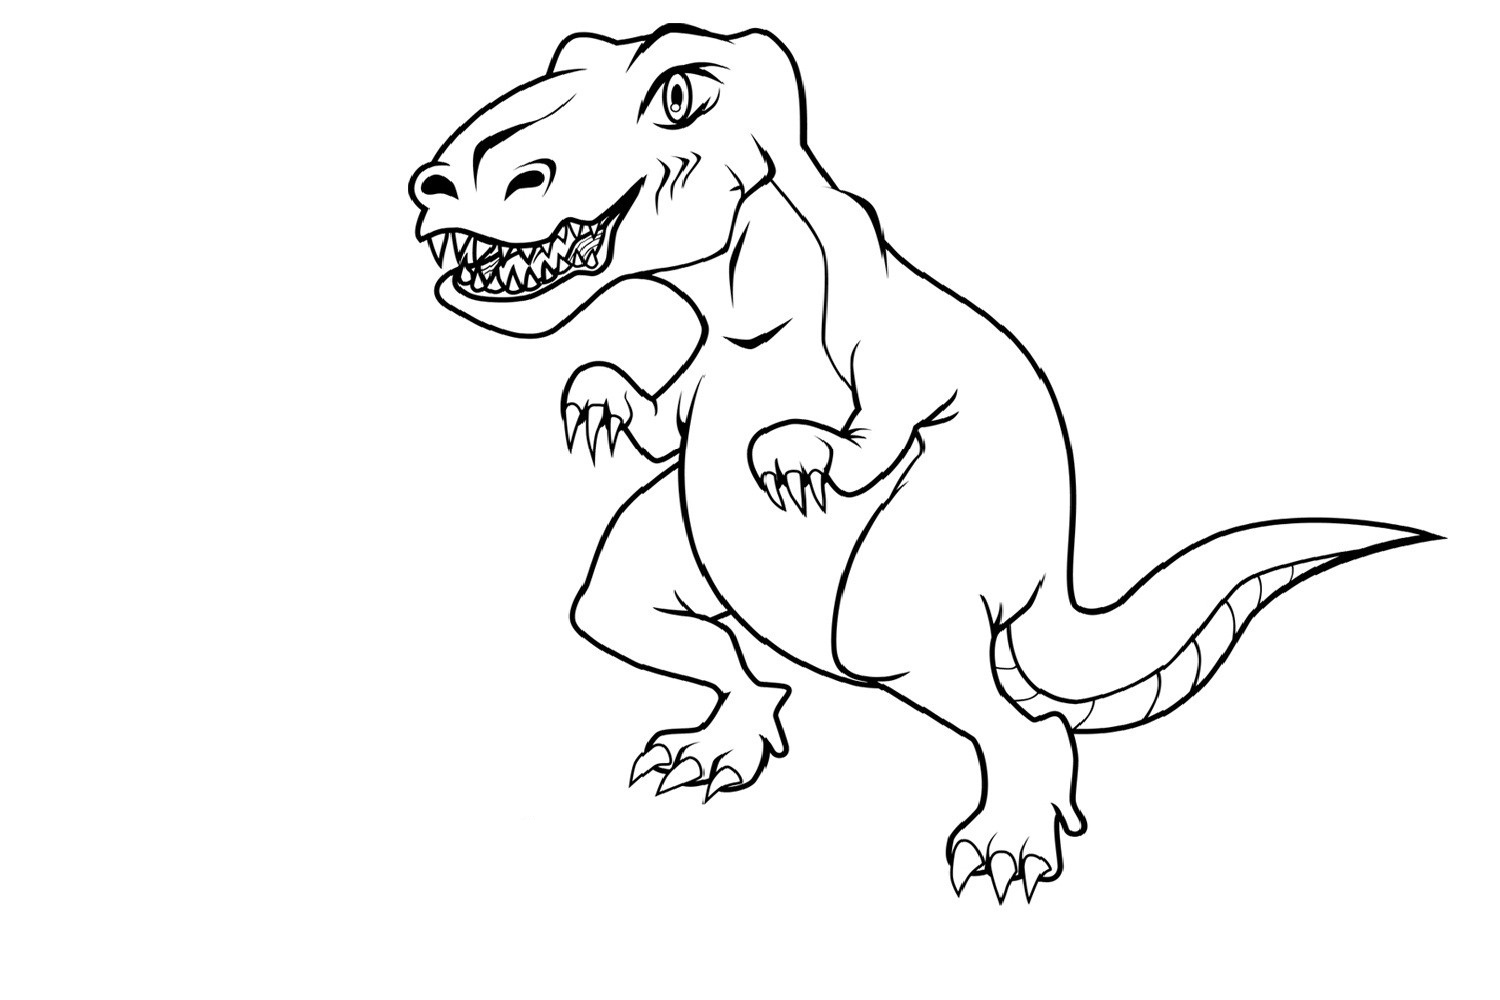 print dinosaur coloring pages coloring pages dinosaur free printable coloring pages pages coloring print dinosaur 